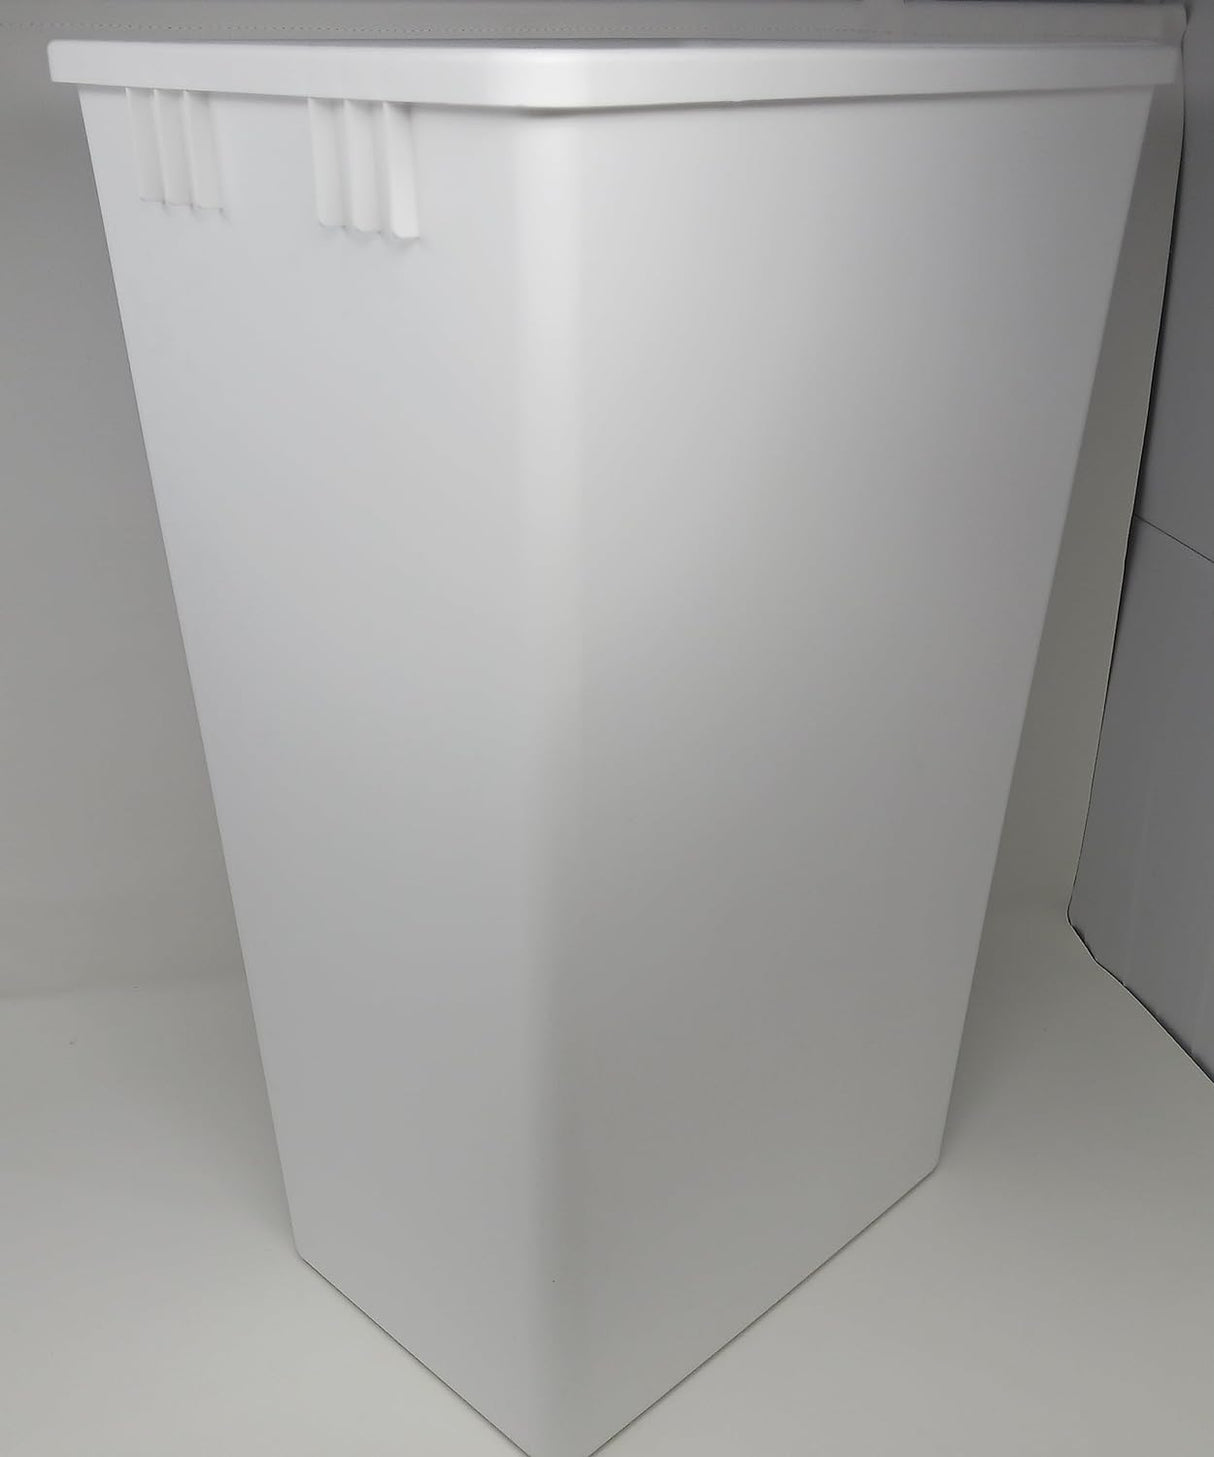 Kesseböhmer 36Qt.(34 Liters) or 52Qt.(49 Liters) Replacement Waste Bin for Cabinet Recycling Pull Out Trash Organizer